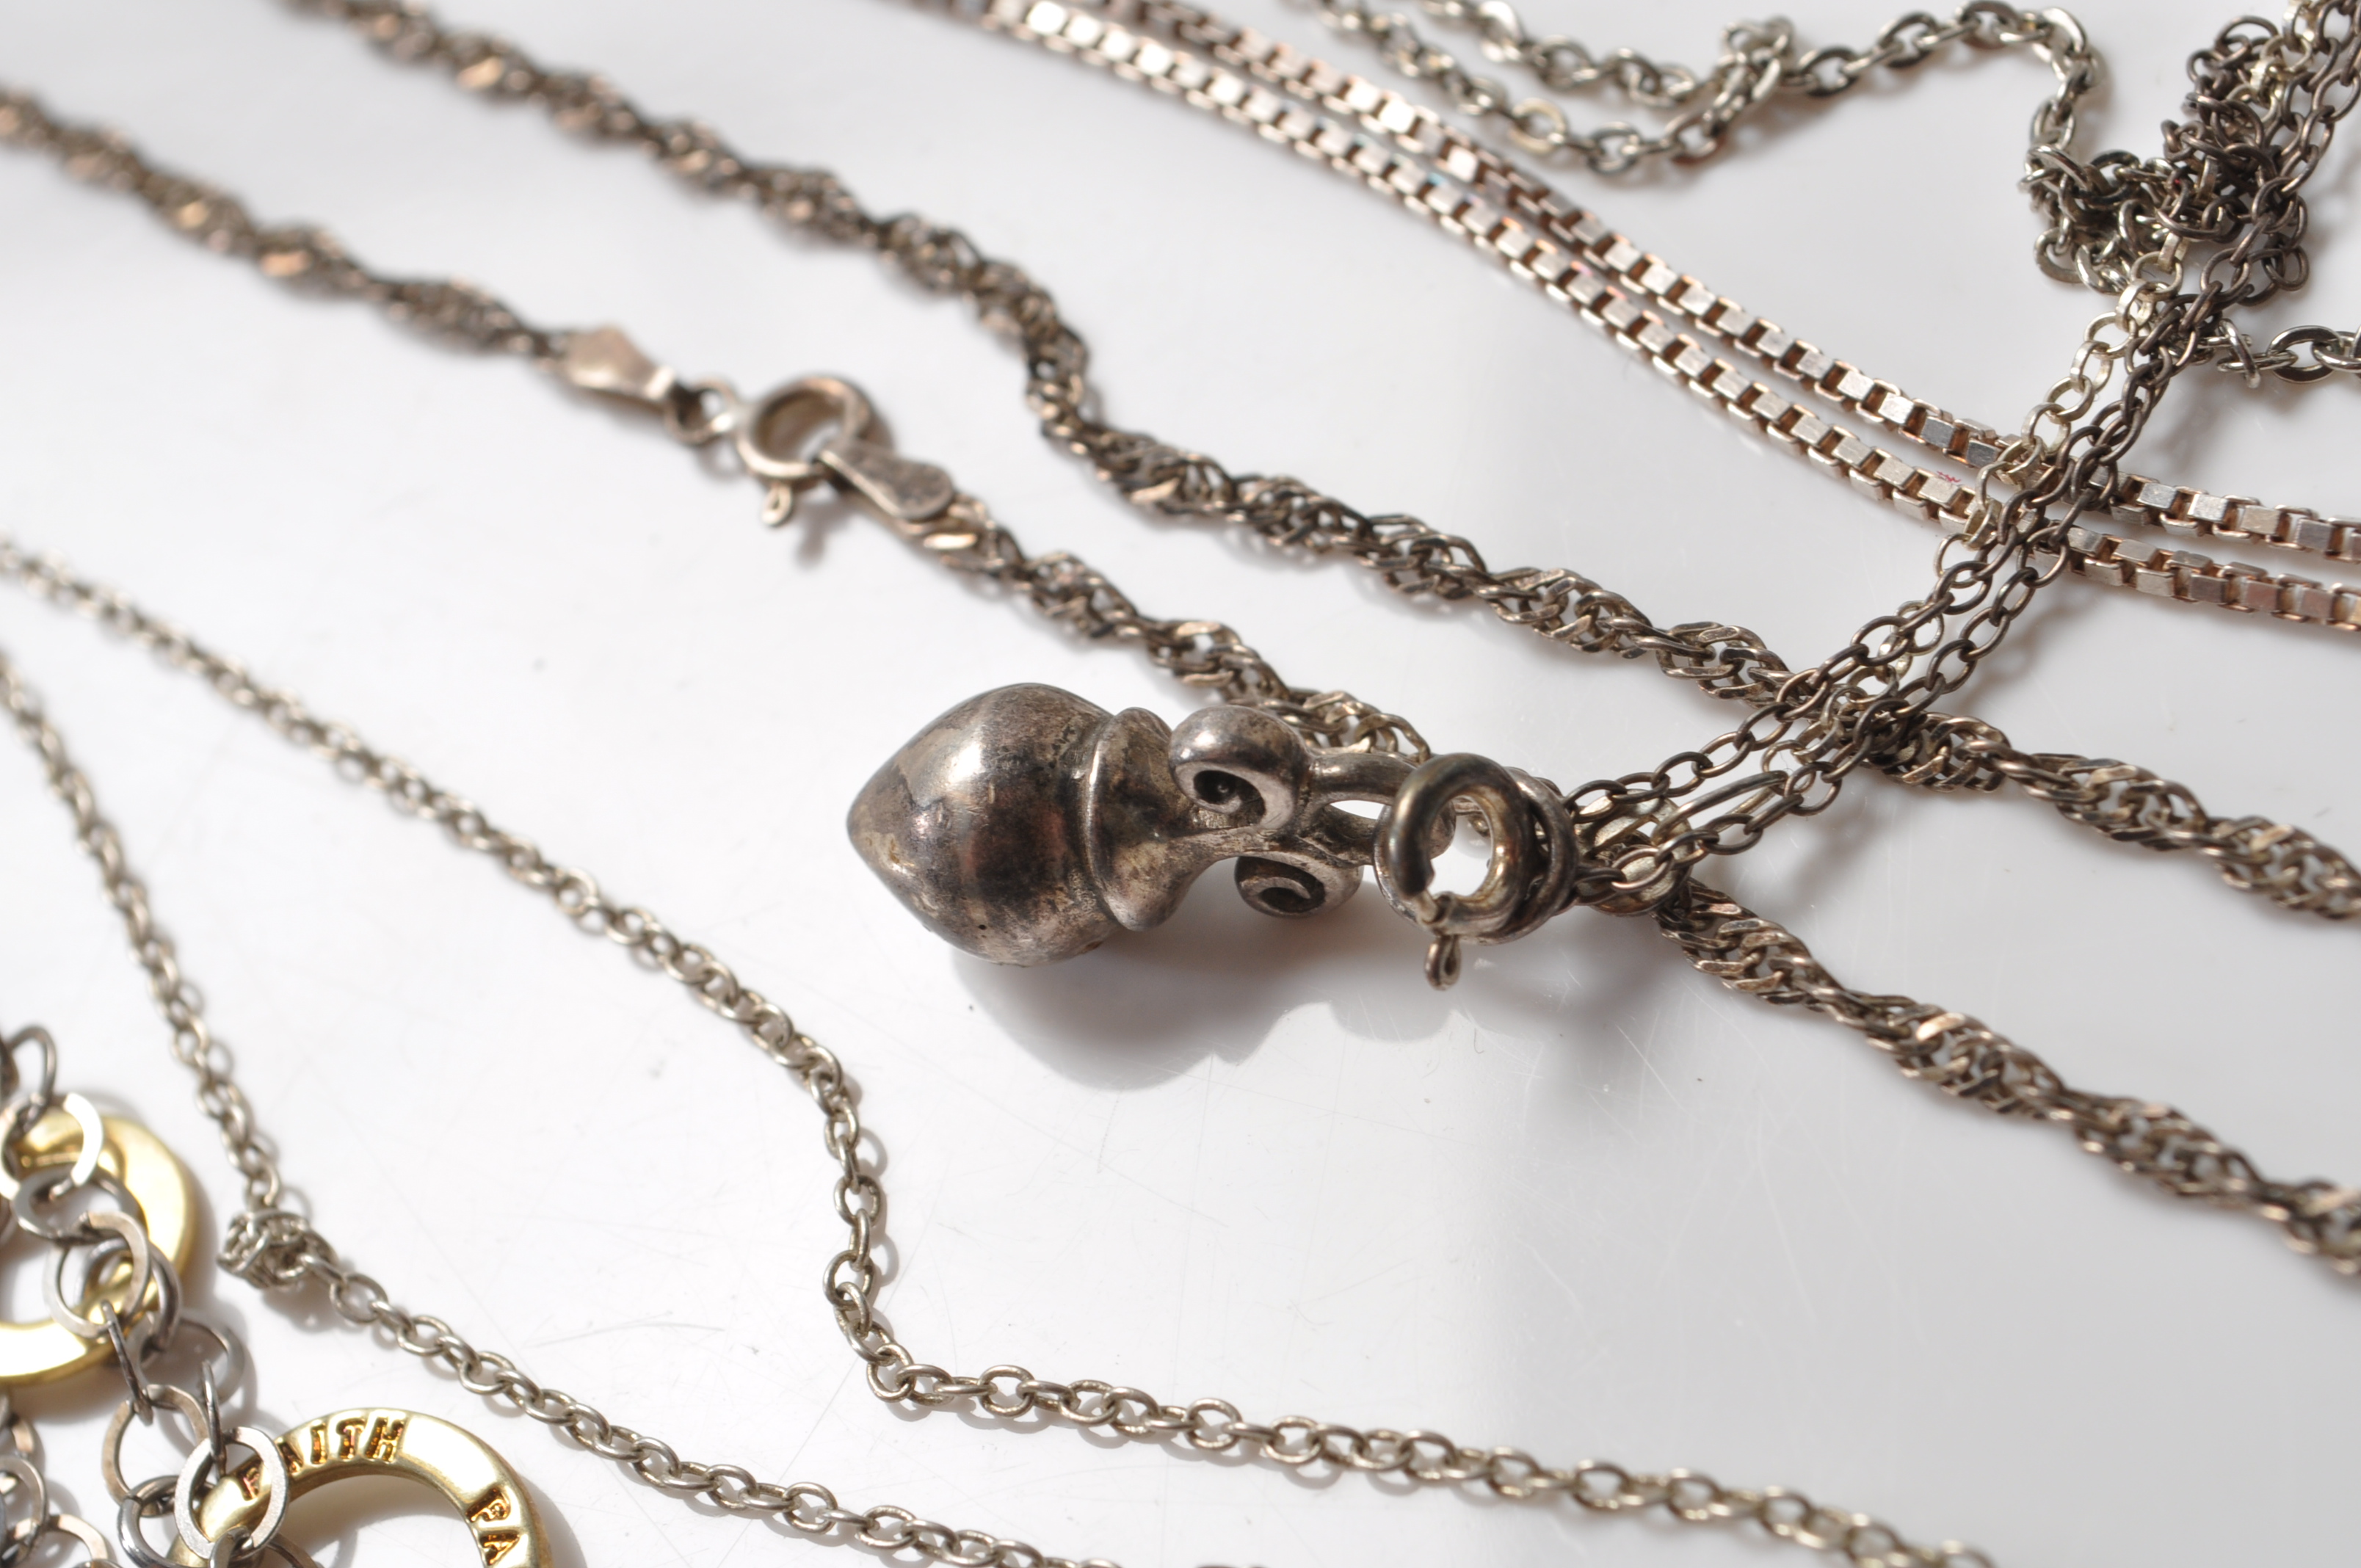 COLLECTION OF STAMPED 925 SILVER CHAIN NECKLACES AND PENDANTS. - Image 11 of 12